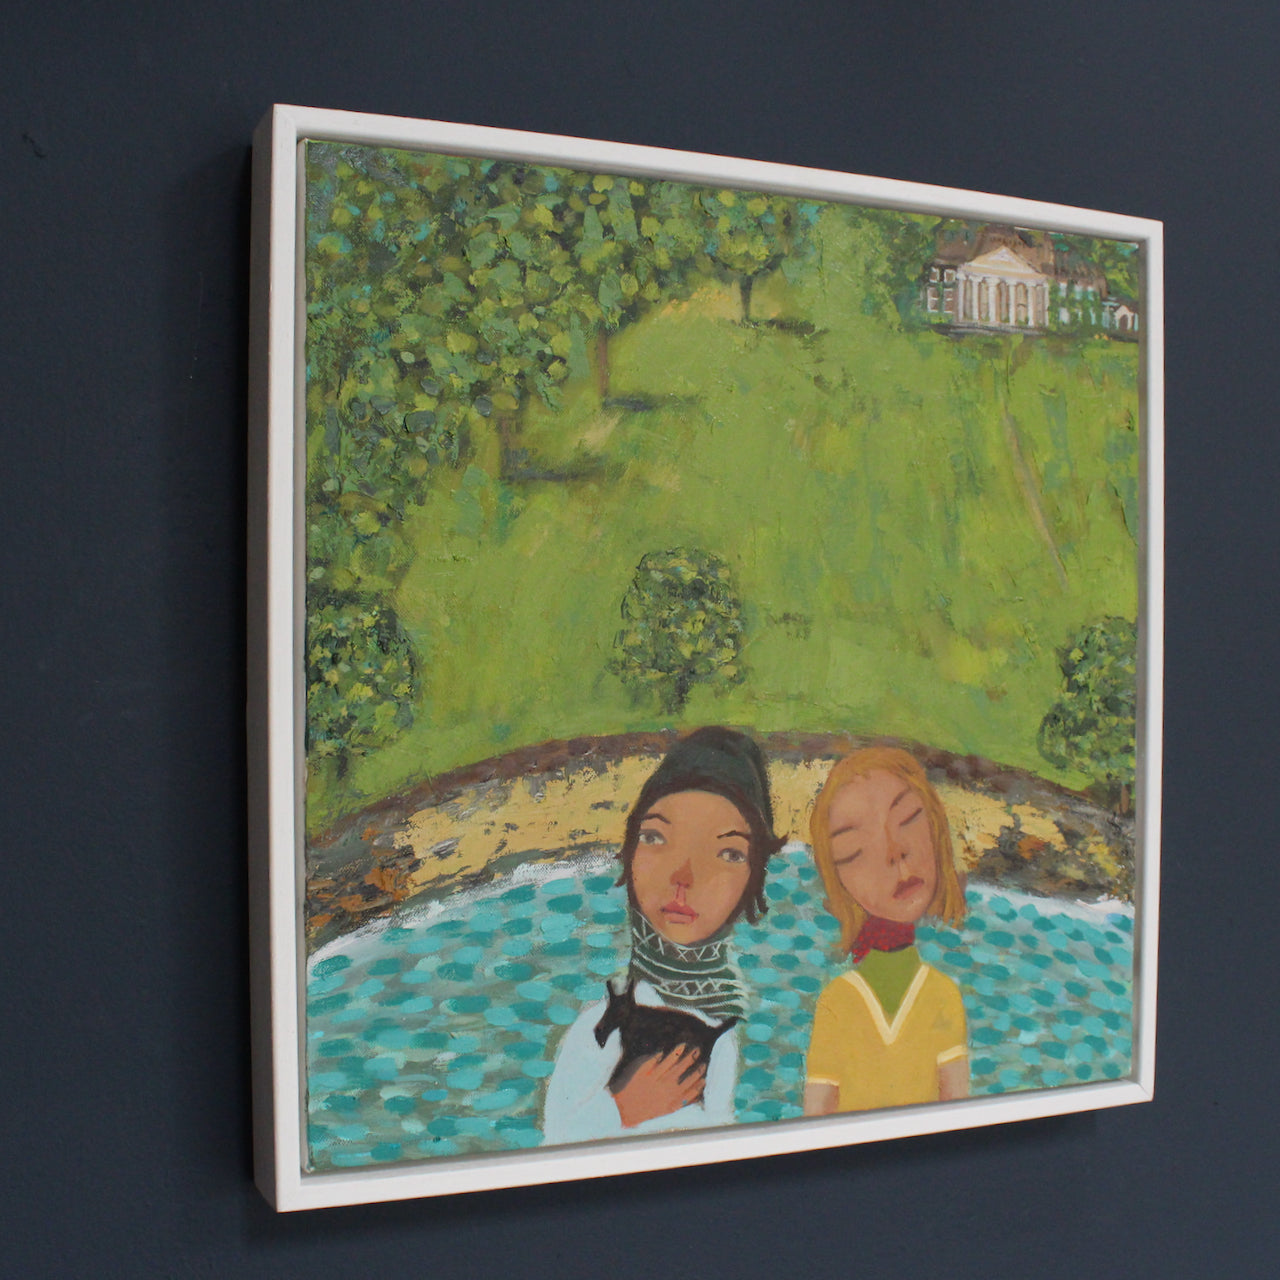 A Siobhan Purdy painting of two women, one holding a small dog, on a boat with some sea, shoreline and a formal green garden in the background.